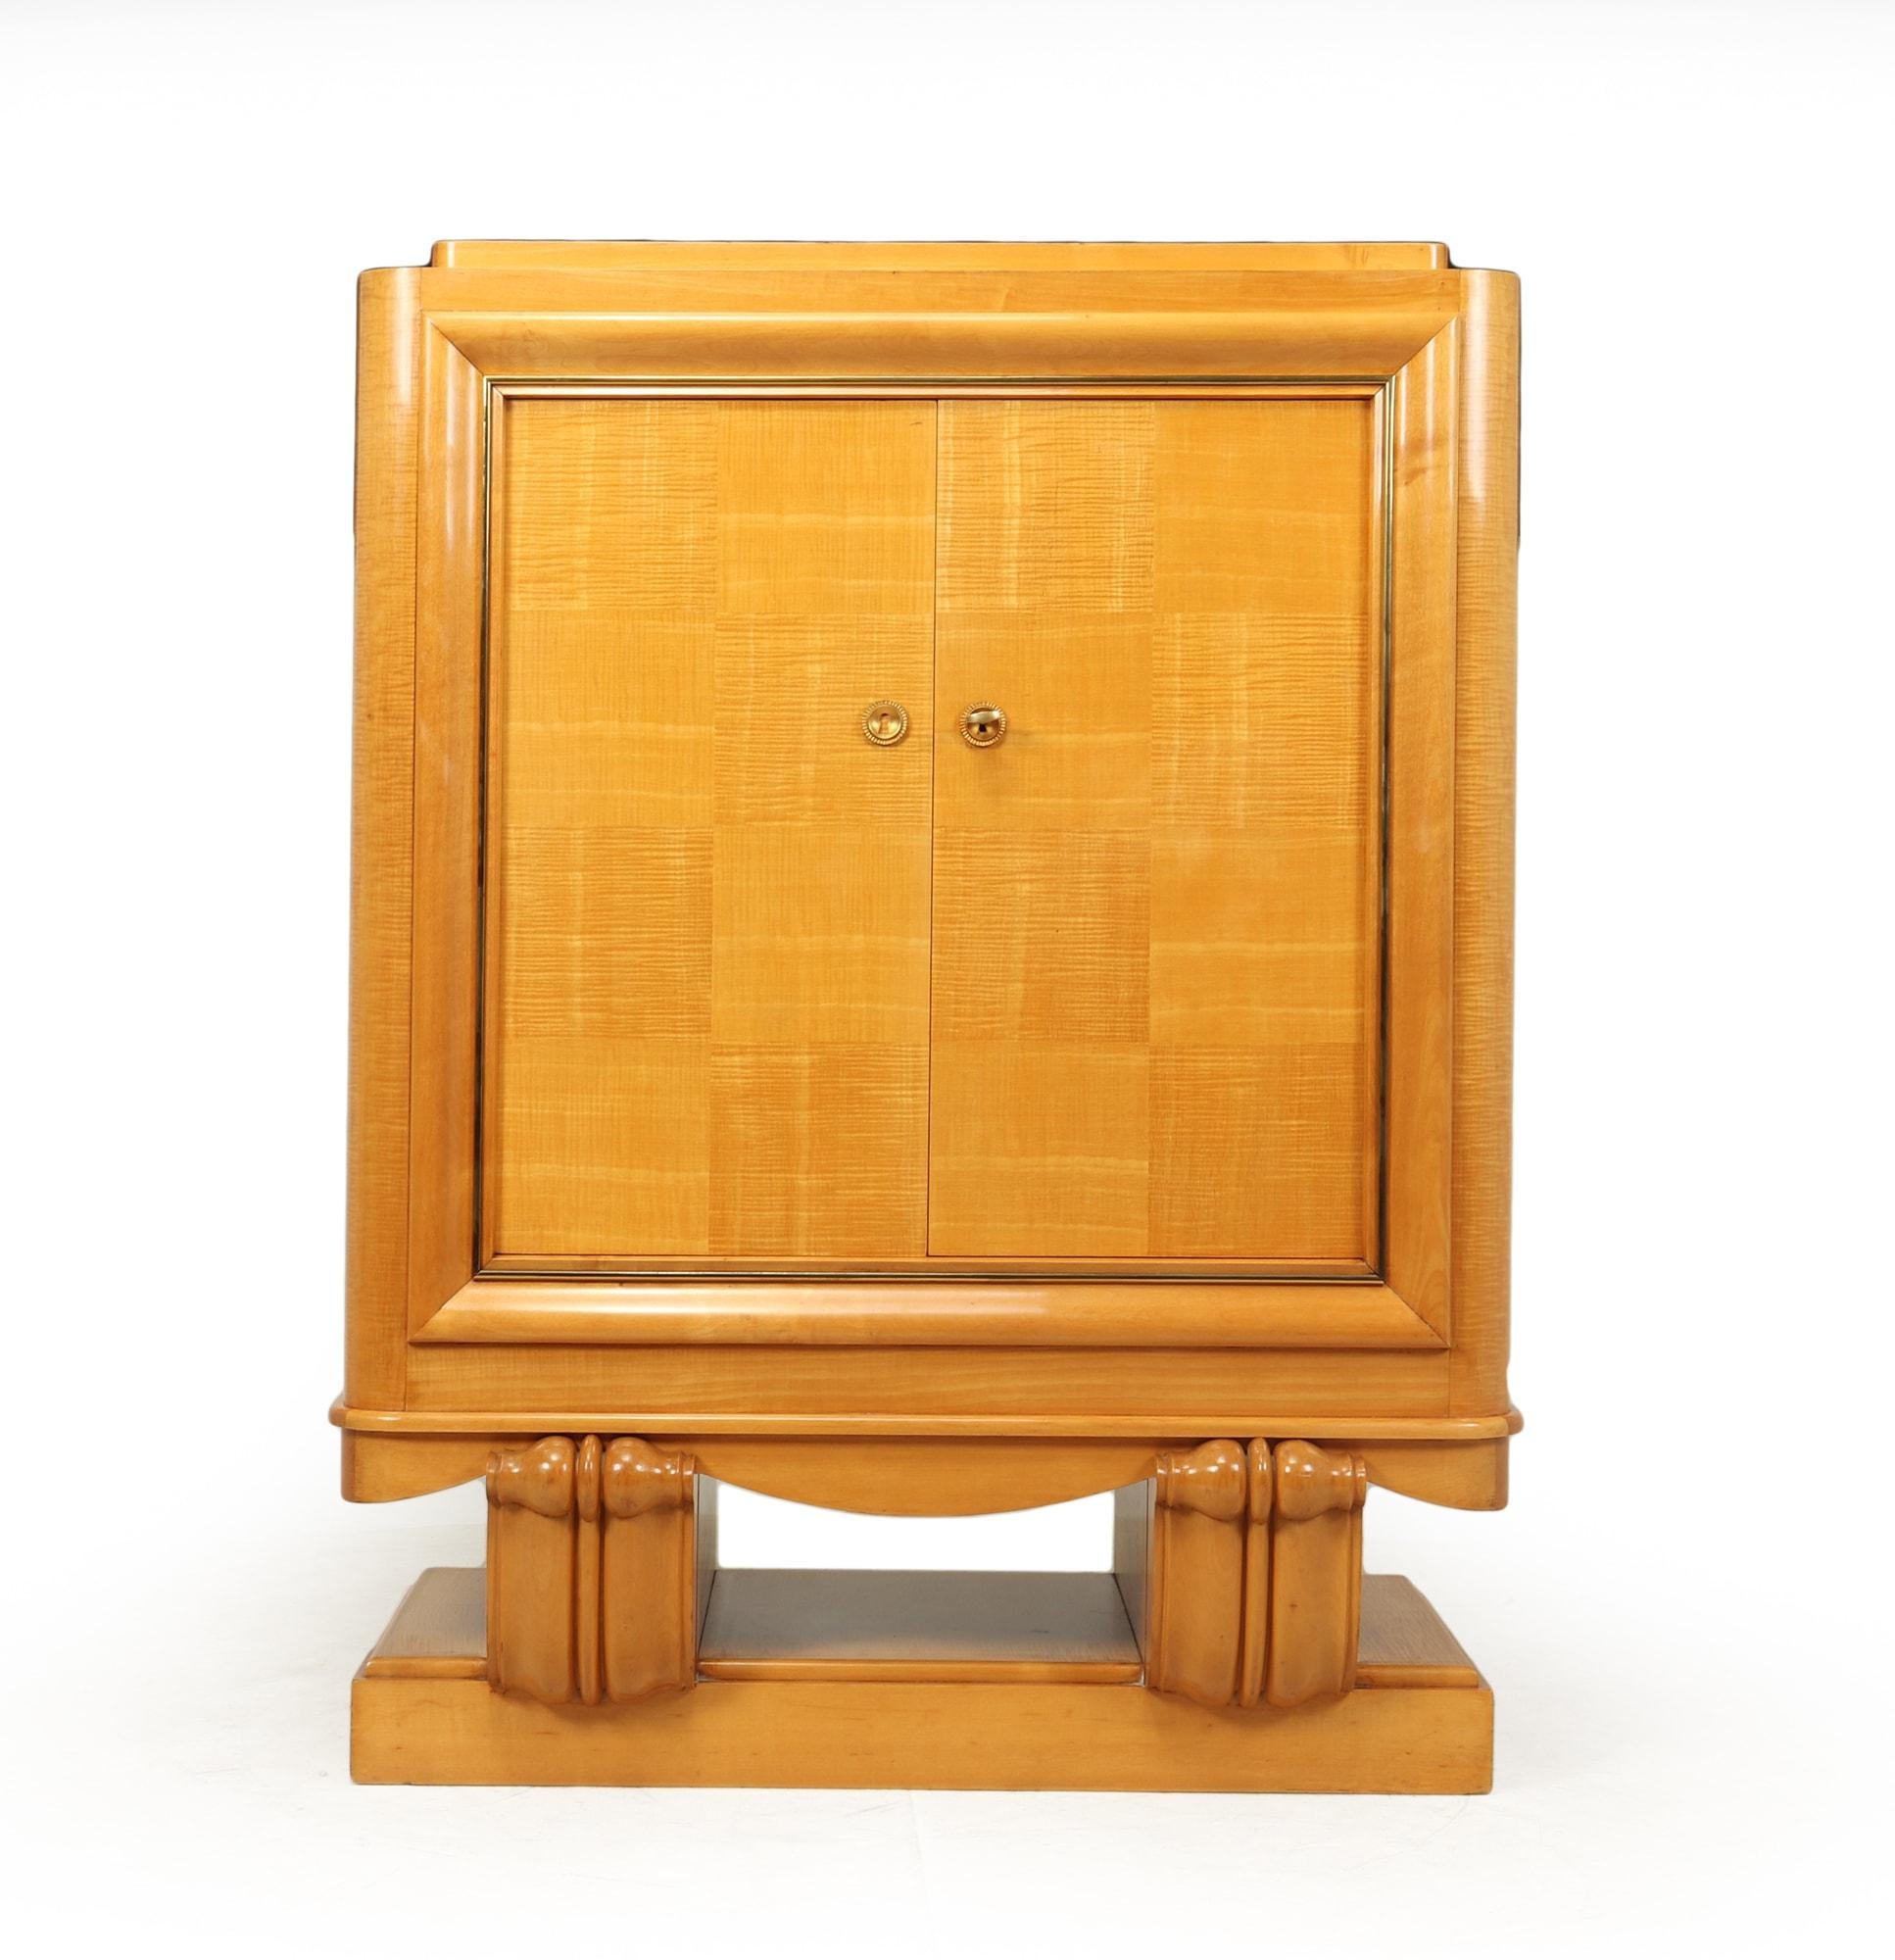 A stunning French Art Deco cocktail drinks cabinet in sycamore with two doors standing on an ornate base, inside has original mirrored slide and raised shelf ( mirror has foxing) the cabinet has been professionally polished by hand and is in